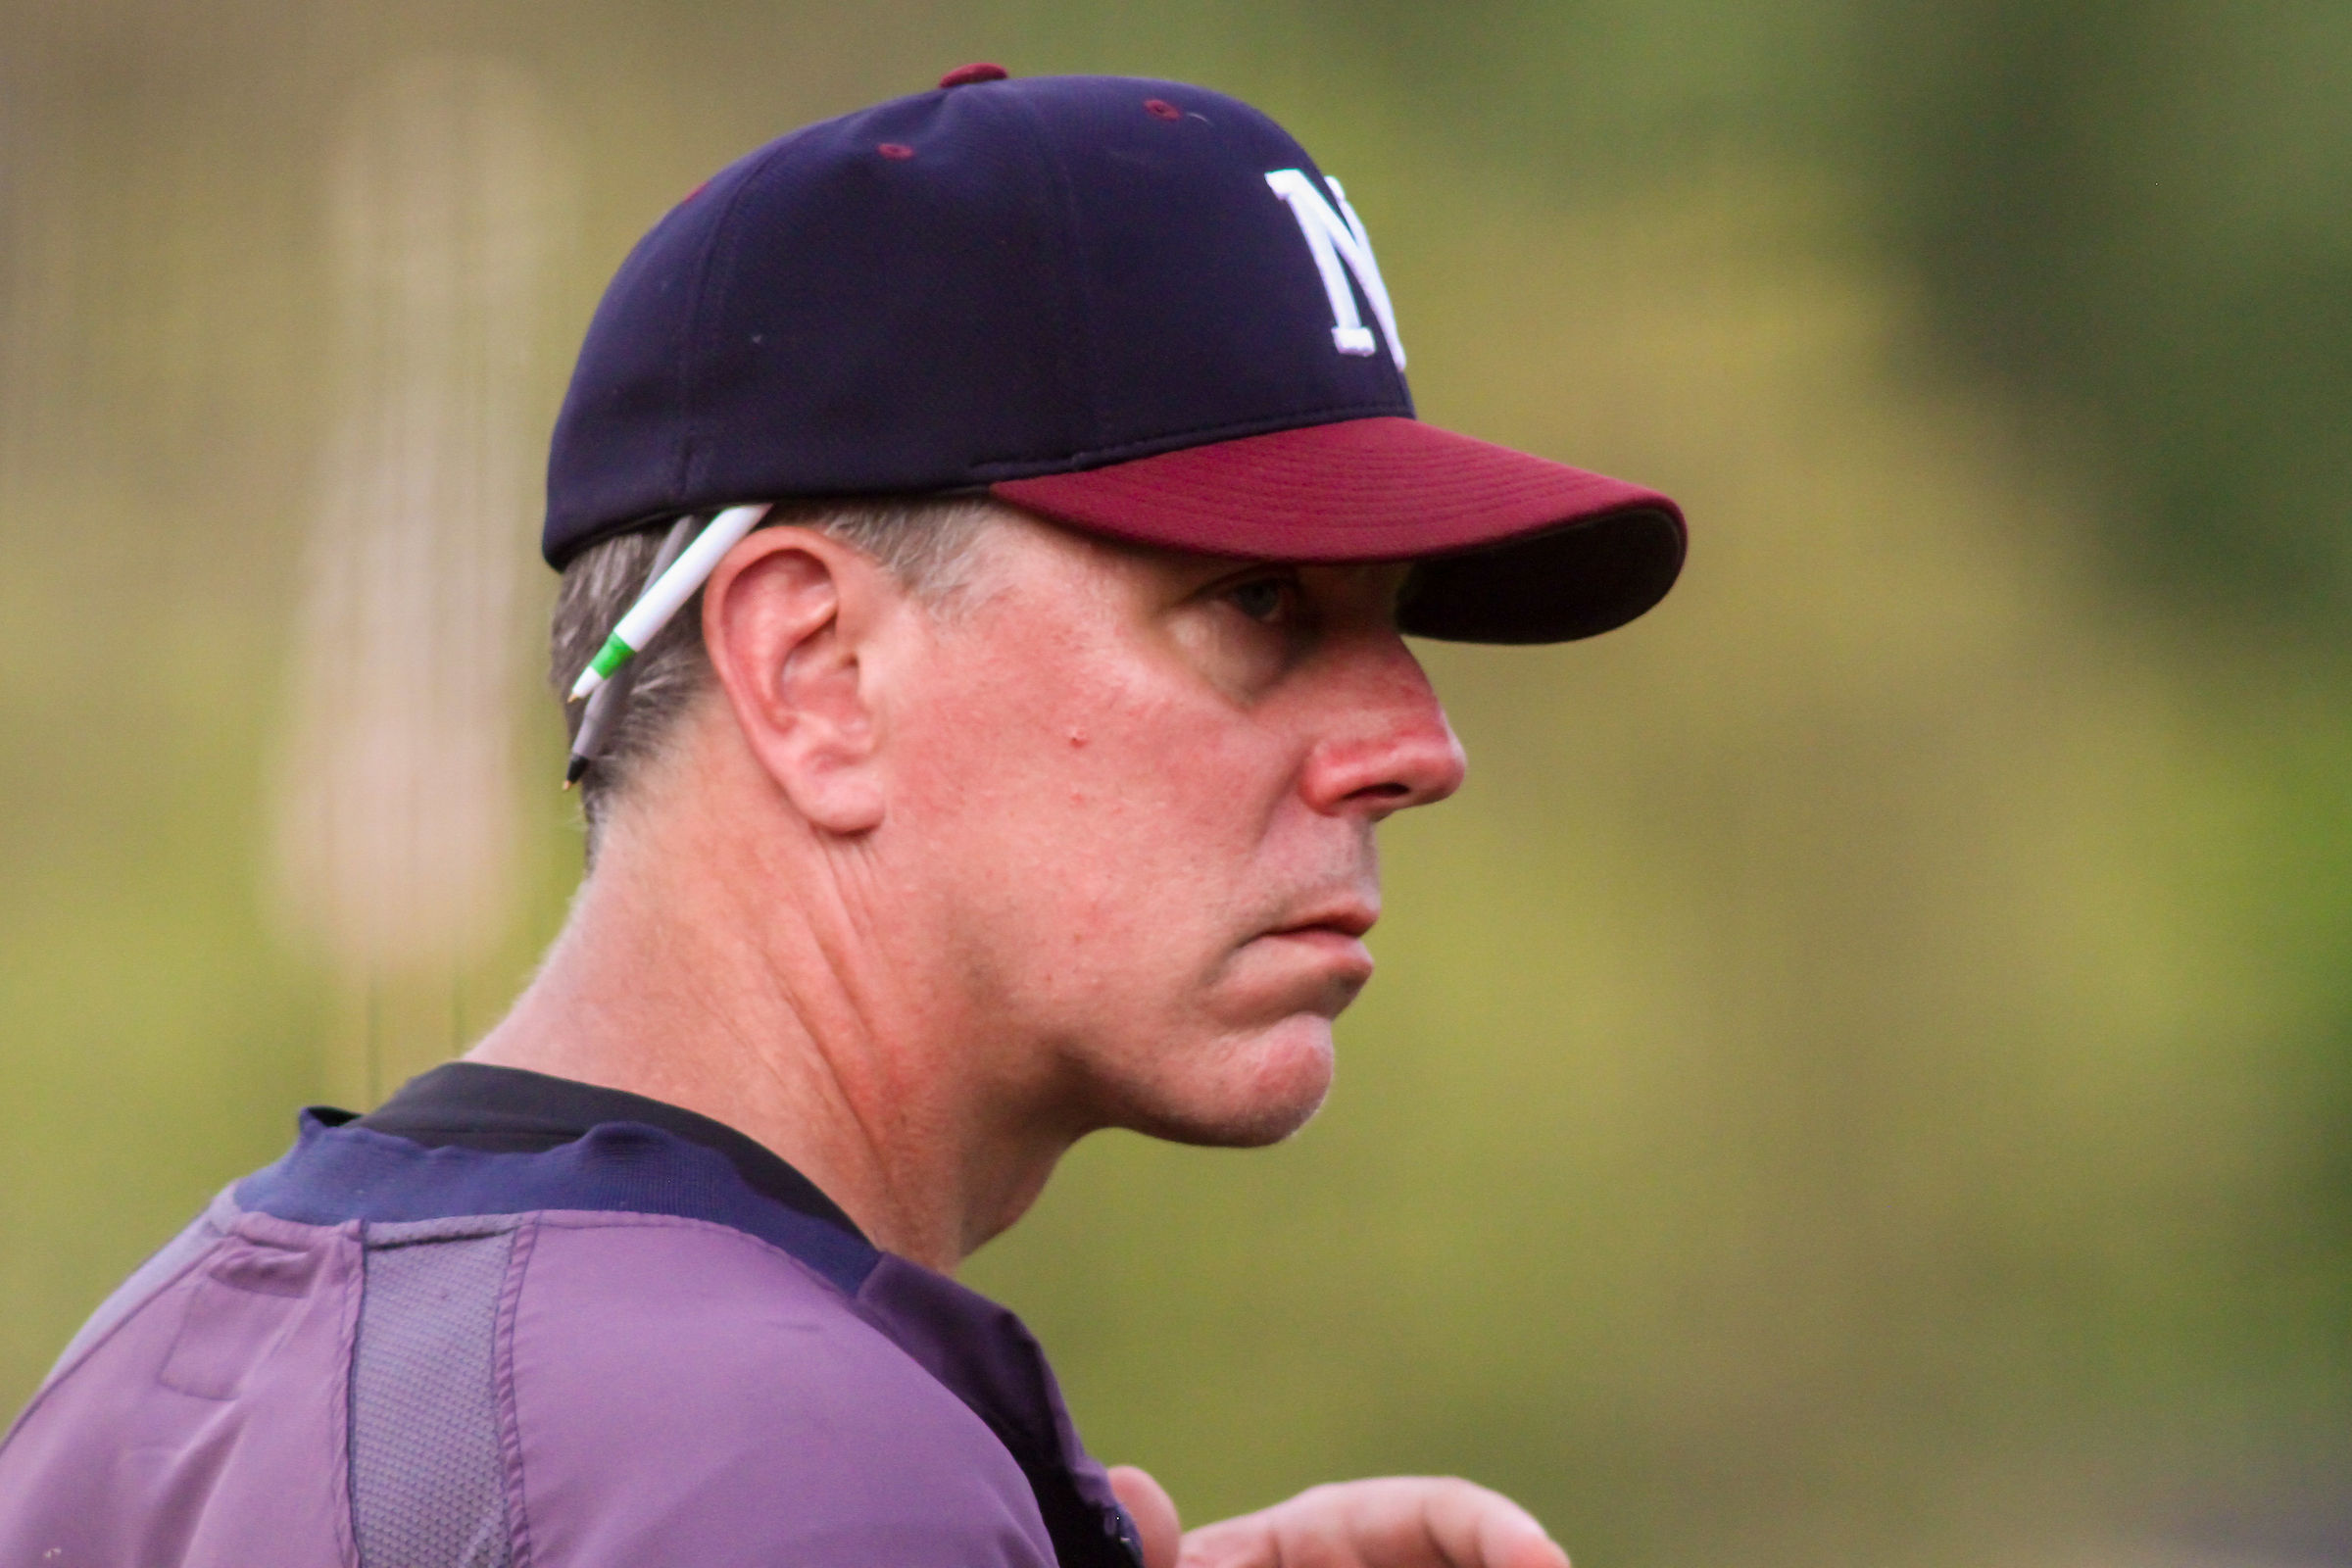 West Allis Nationals manager Steve Elliott during a Wisconsin State League baseball game against the Greater Green Bay Blue Ribbons on August 8, 2020 at Joannes Stadium  in Green Bay, Wisconsin. West Allis defeated Greater Green Bay 10-3.  (Brad Krause/Krause Sports Photography)